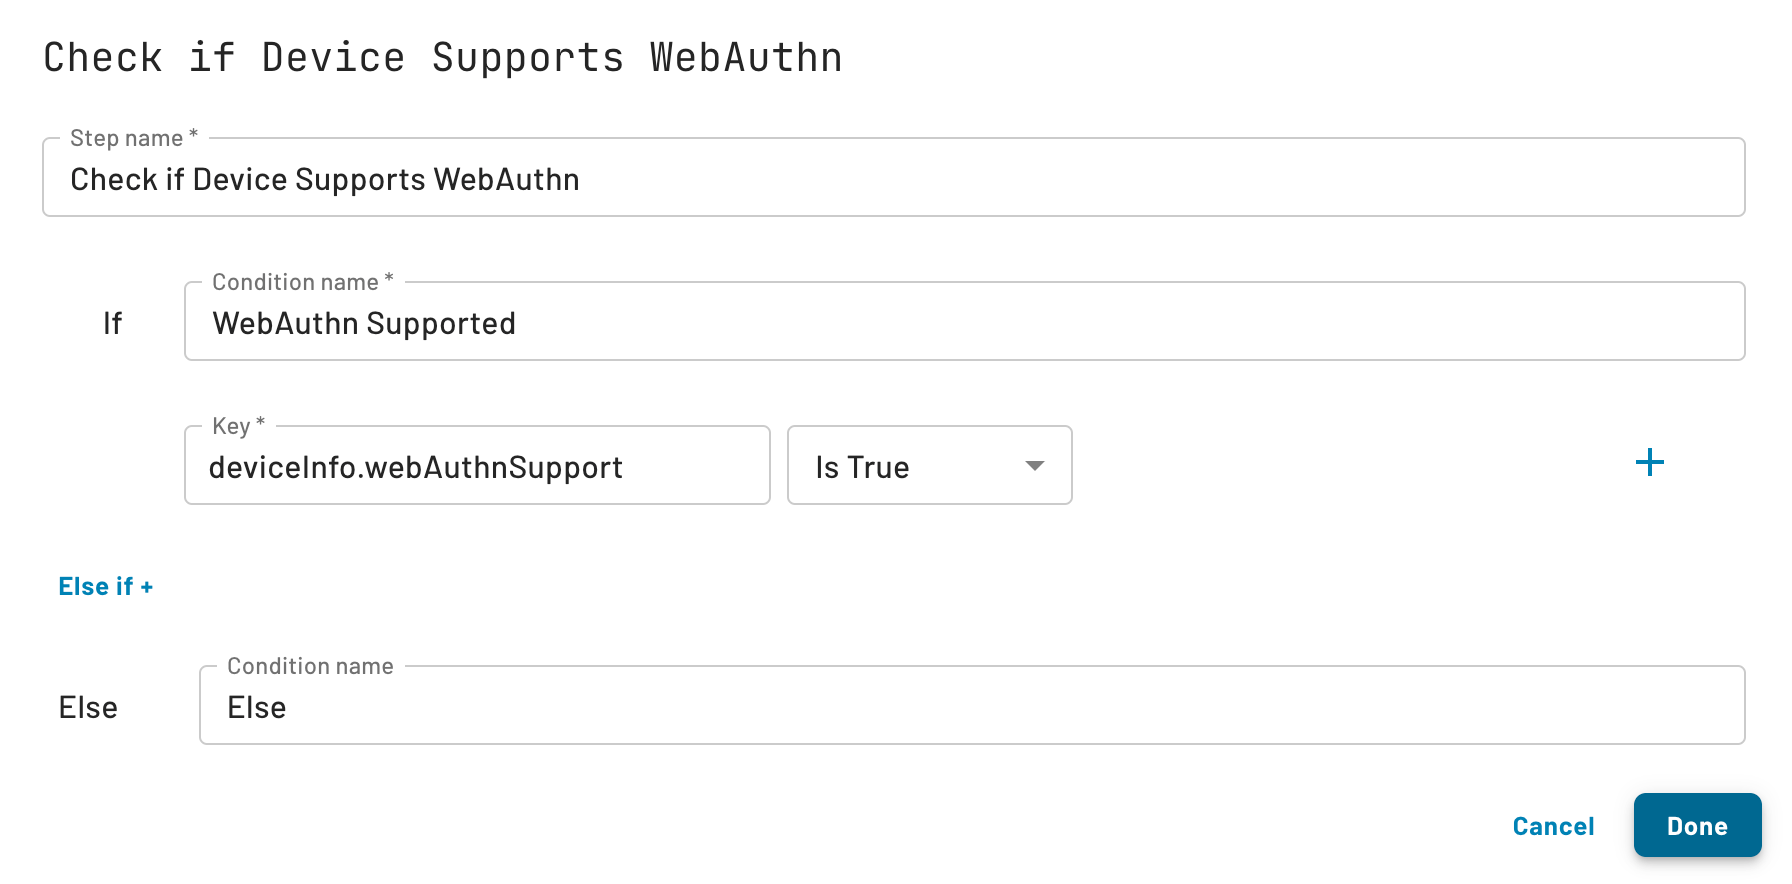 webauthn supported conditional statement